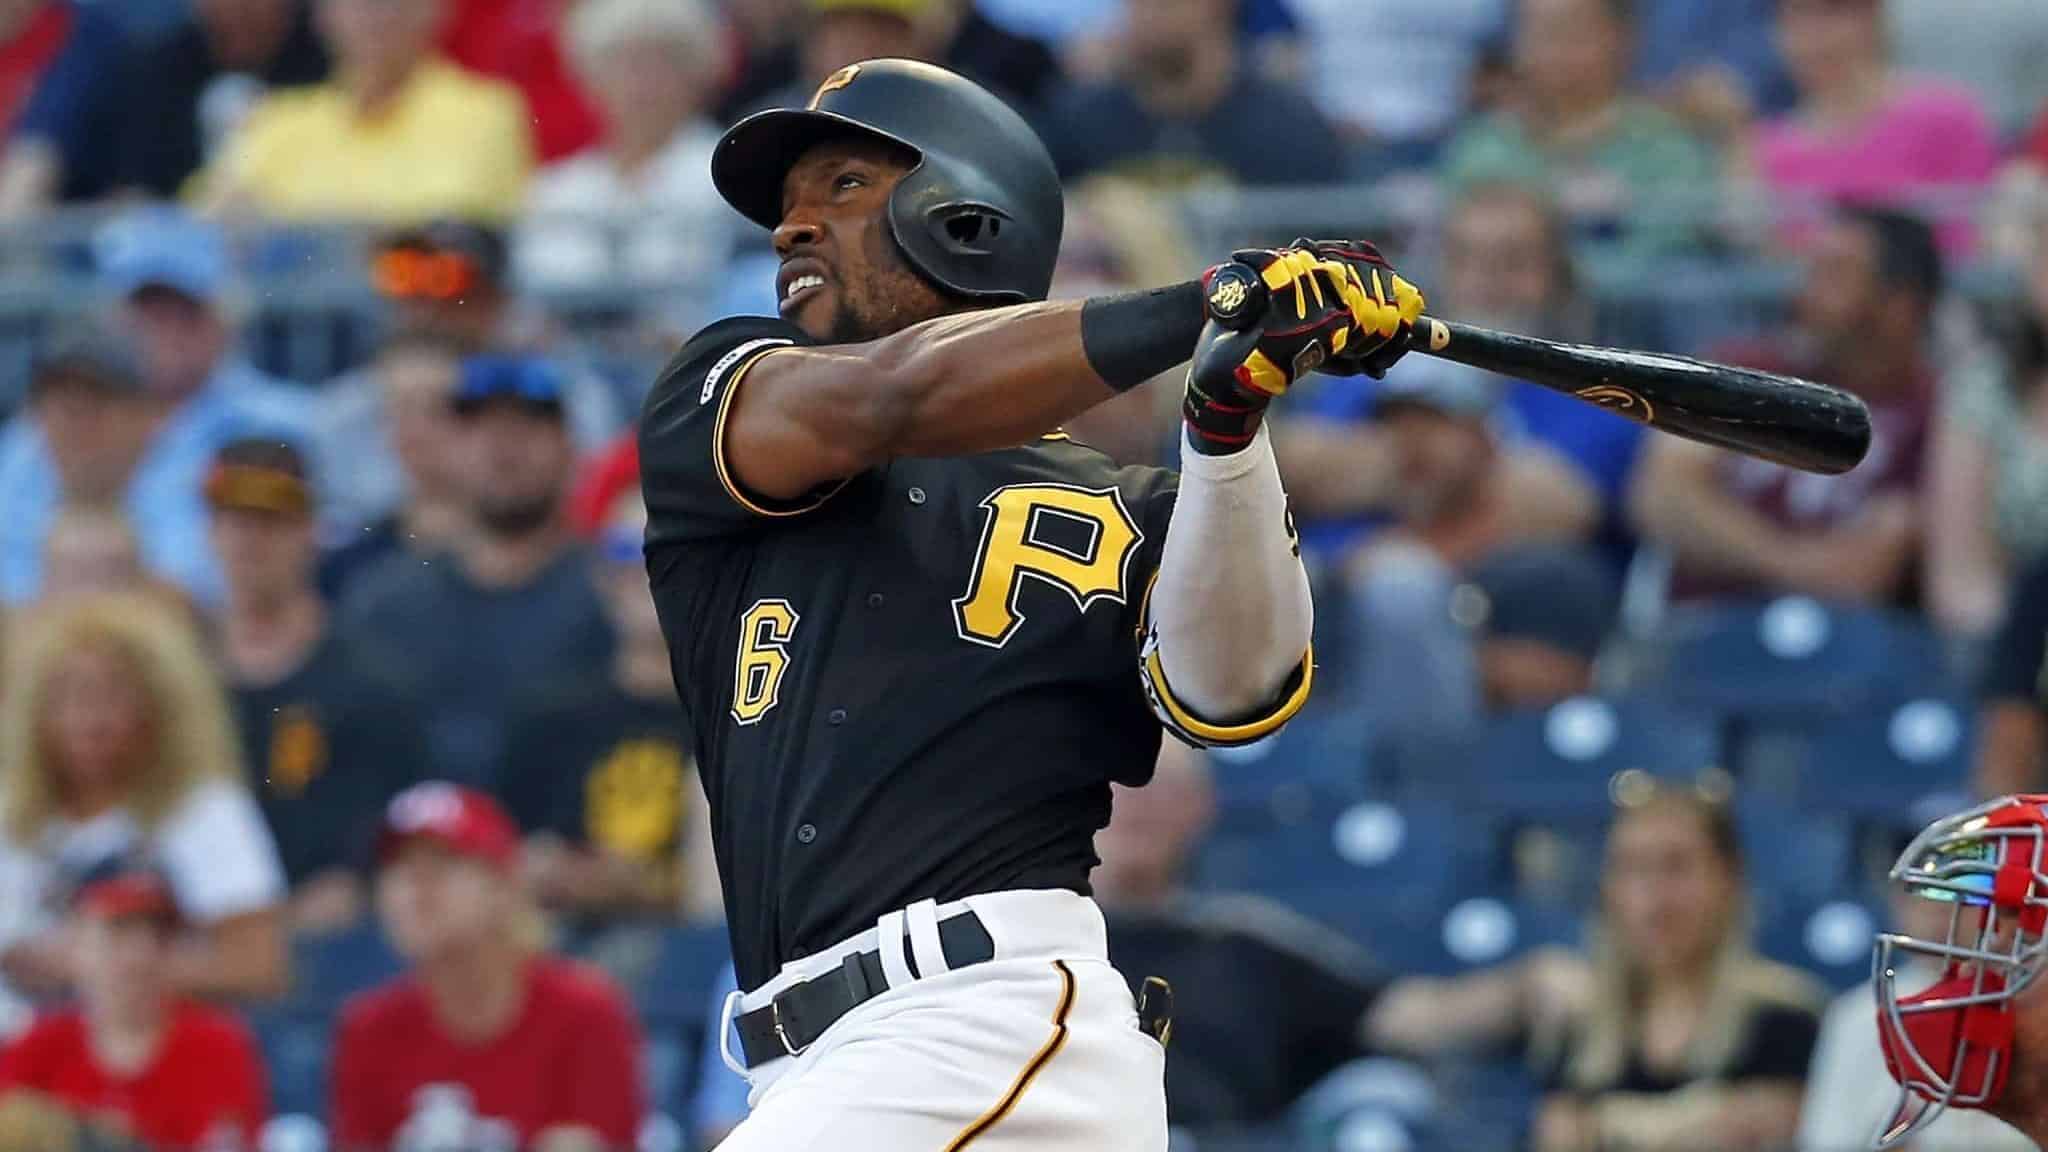 PITTSBURGH, PA - JULY 23: Starling Marte #6 of the Pittsburgh Pirates hits a three-run home run in the first inning against the St. Louis Cardinals at PNC Park on July 23, 2019 in Pittsburgh, Pennsylvania.